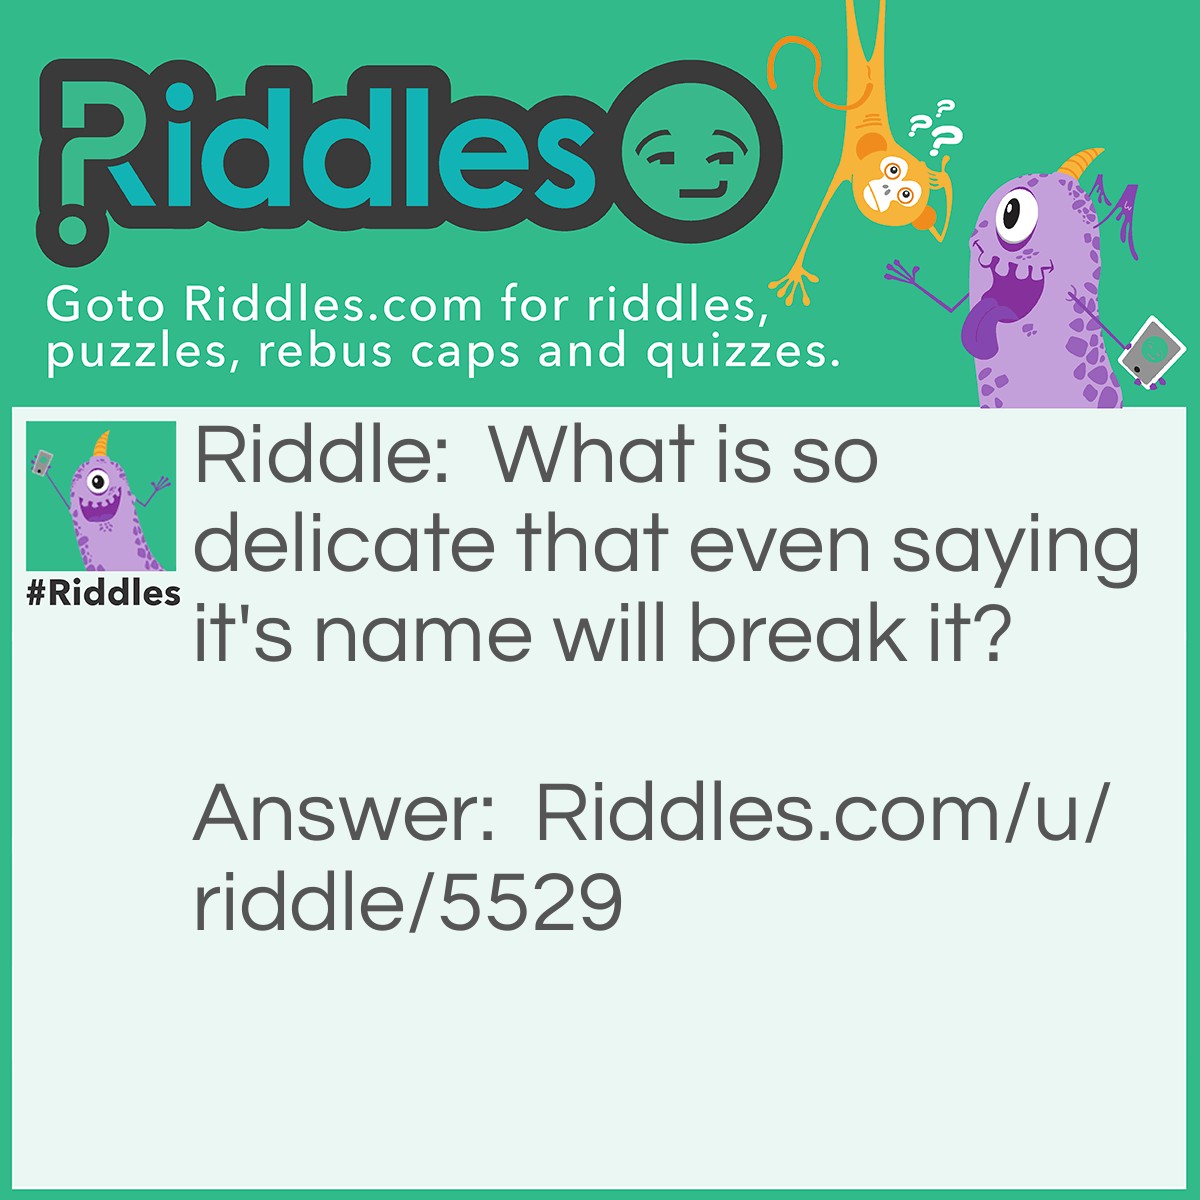 Riddle: What is so delicate that even saying it's name will break it? Answer: Silence.